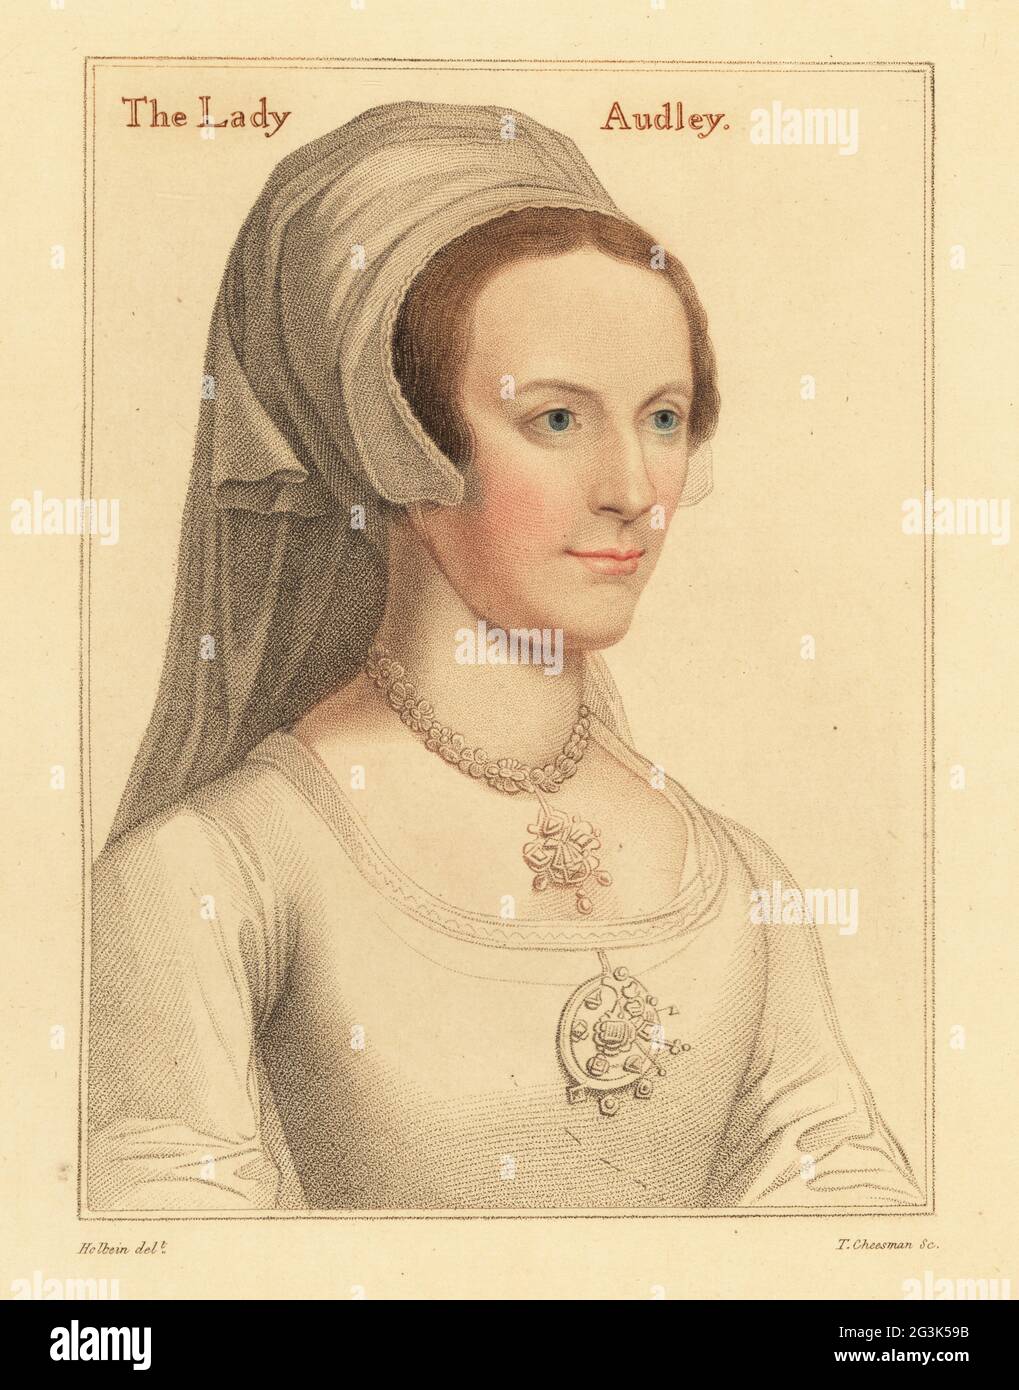 Elizabeth, second wife of Thomas Audley, 1st Baron Audley of Walden. Previously identified as Elizabeth Tuke, wife to George Tuchet, 9th Baron Audley, daughter of SIr Brian Tuke, Treasurer to the Chamber of King Henry VIII. Handcoloured copperplate stipple engraving by Thomas Cheesman after a portrait by Hans Holbein the Younger from Imitations of Original Drawings by Hans Holbein, John Chamberlaine, London, 1812. Stock Photo